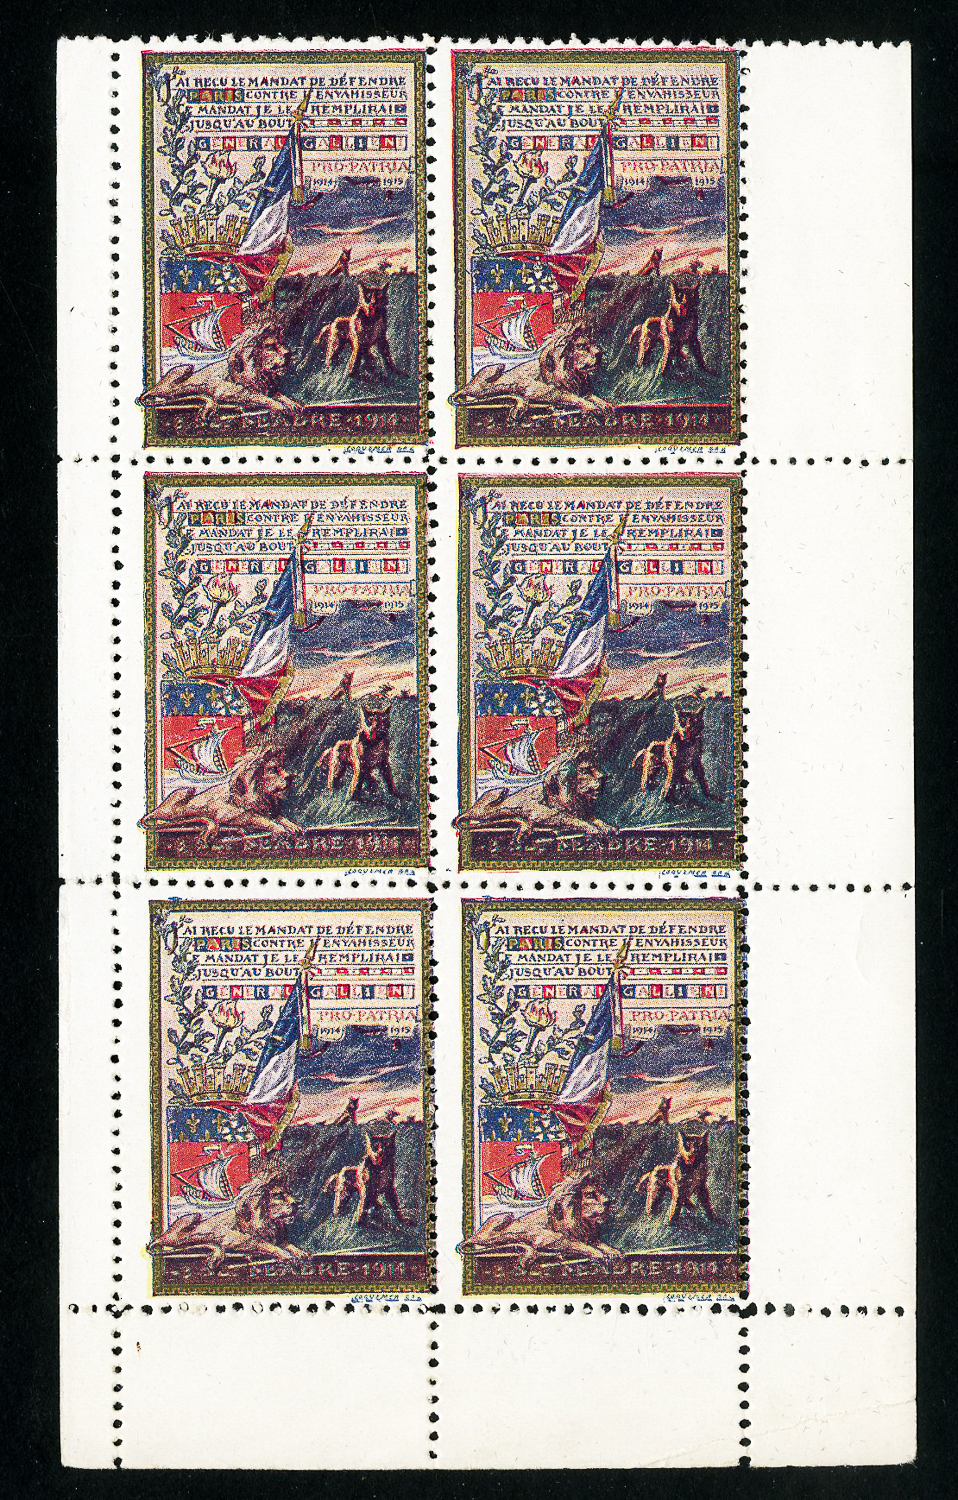 France Stamps WWI 1914 Portrait Pane of 6 Wartime Rarity | eBay